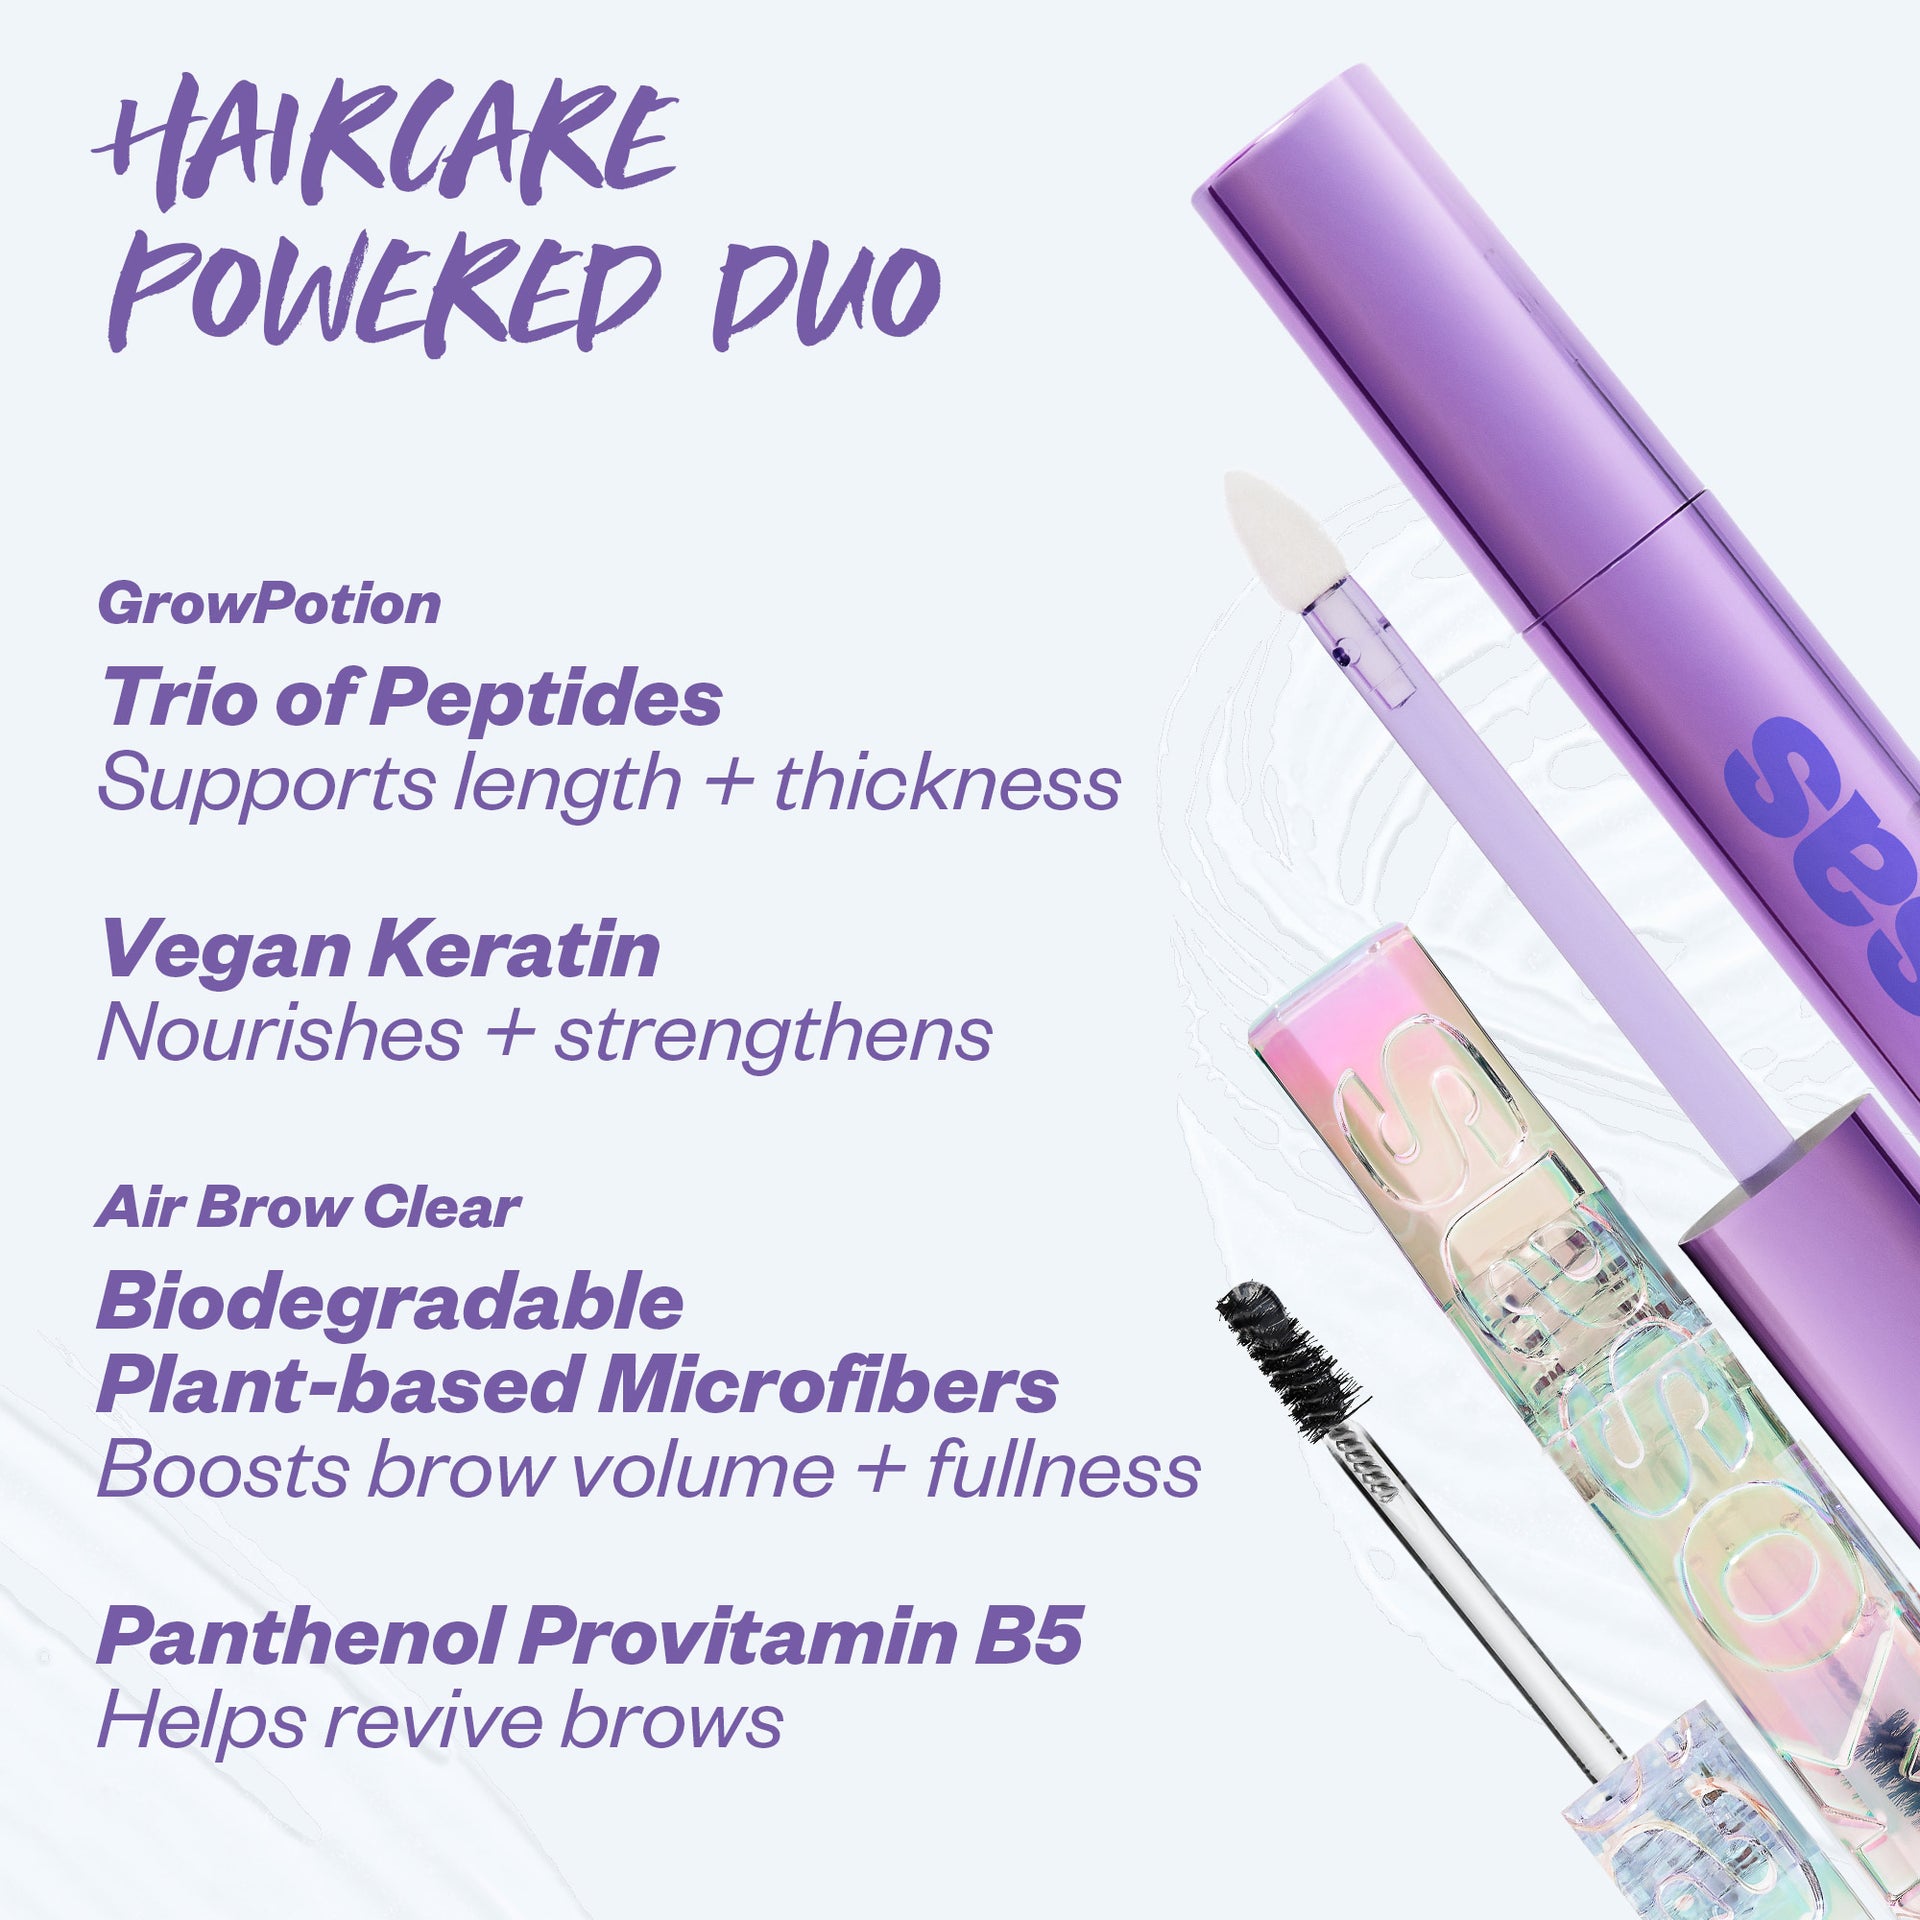 key ingredients and benefits of the haircare powered duo: Grow Potion and Air Brow Clear